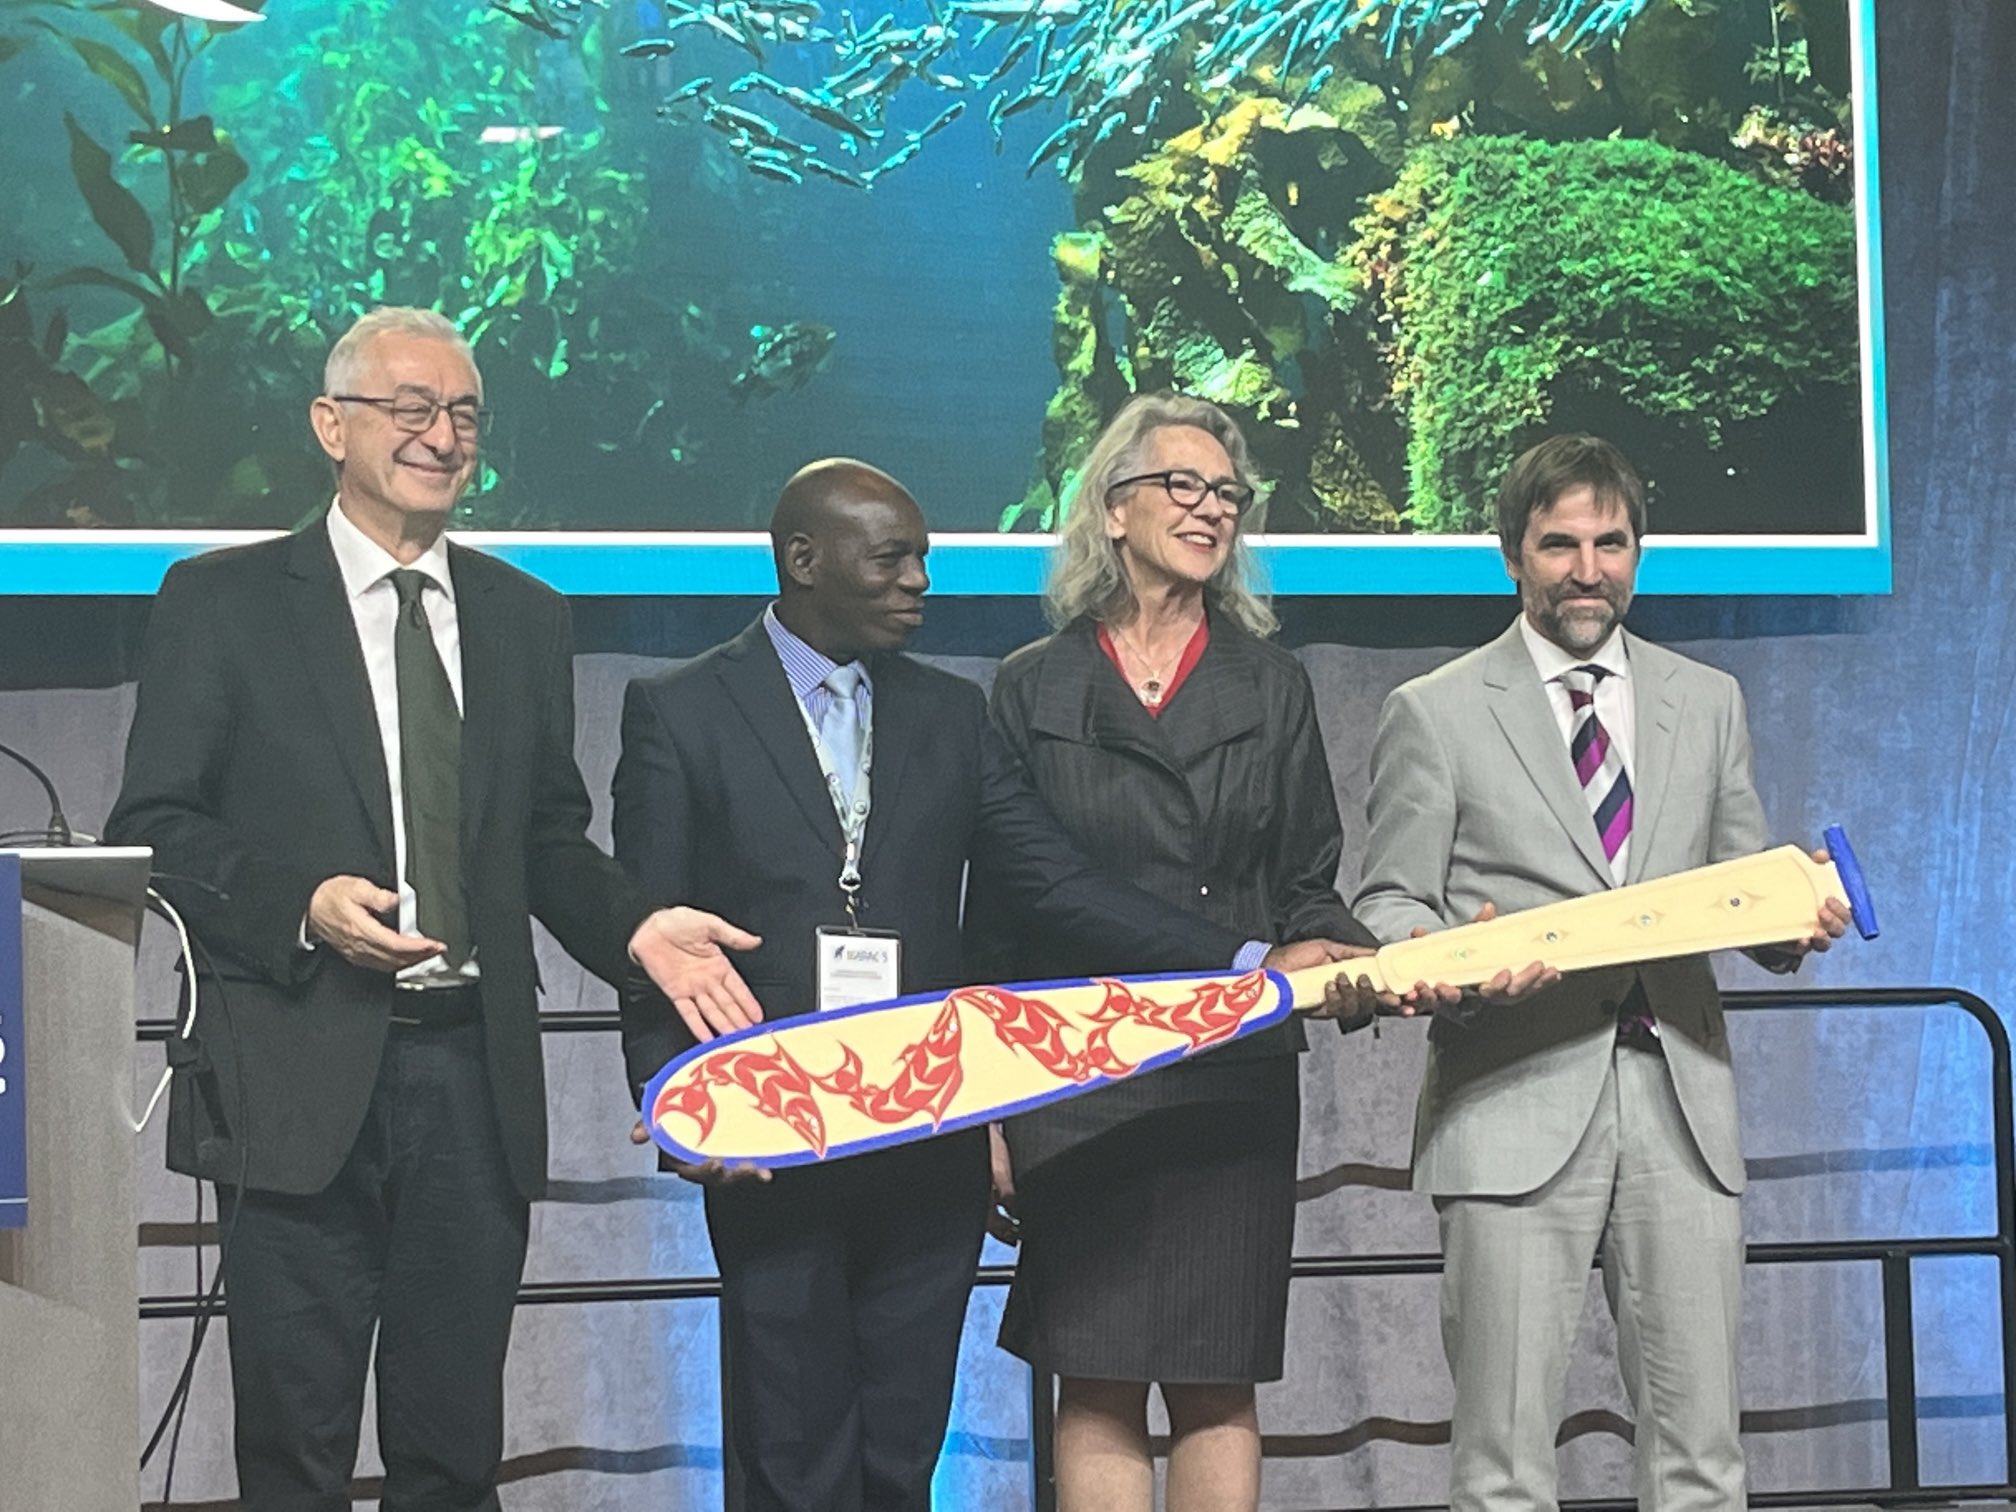 First Nations Legendary Paddle passed from IMPAC5 hosts Canada to IMPAC6 host nation Senegal